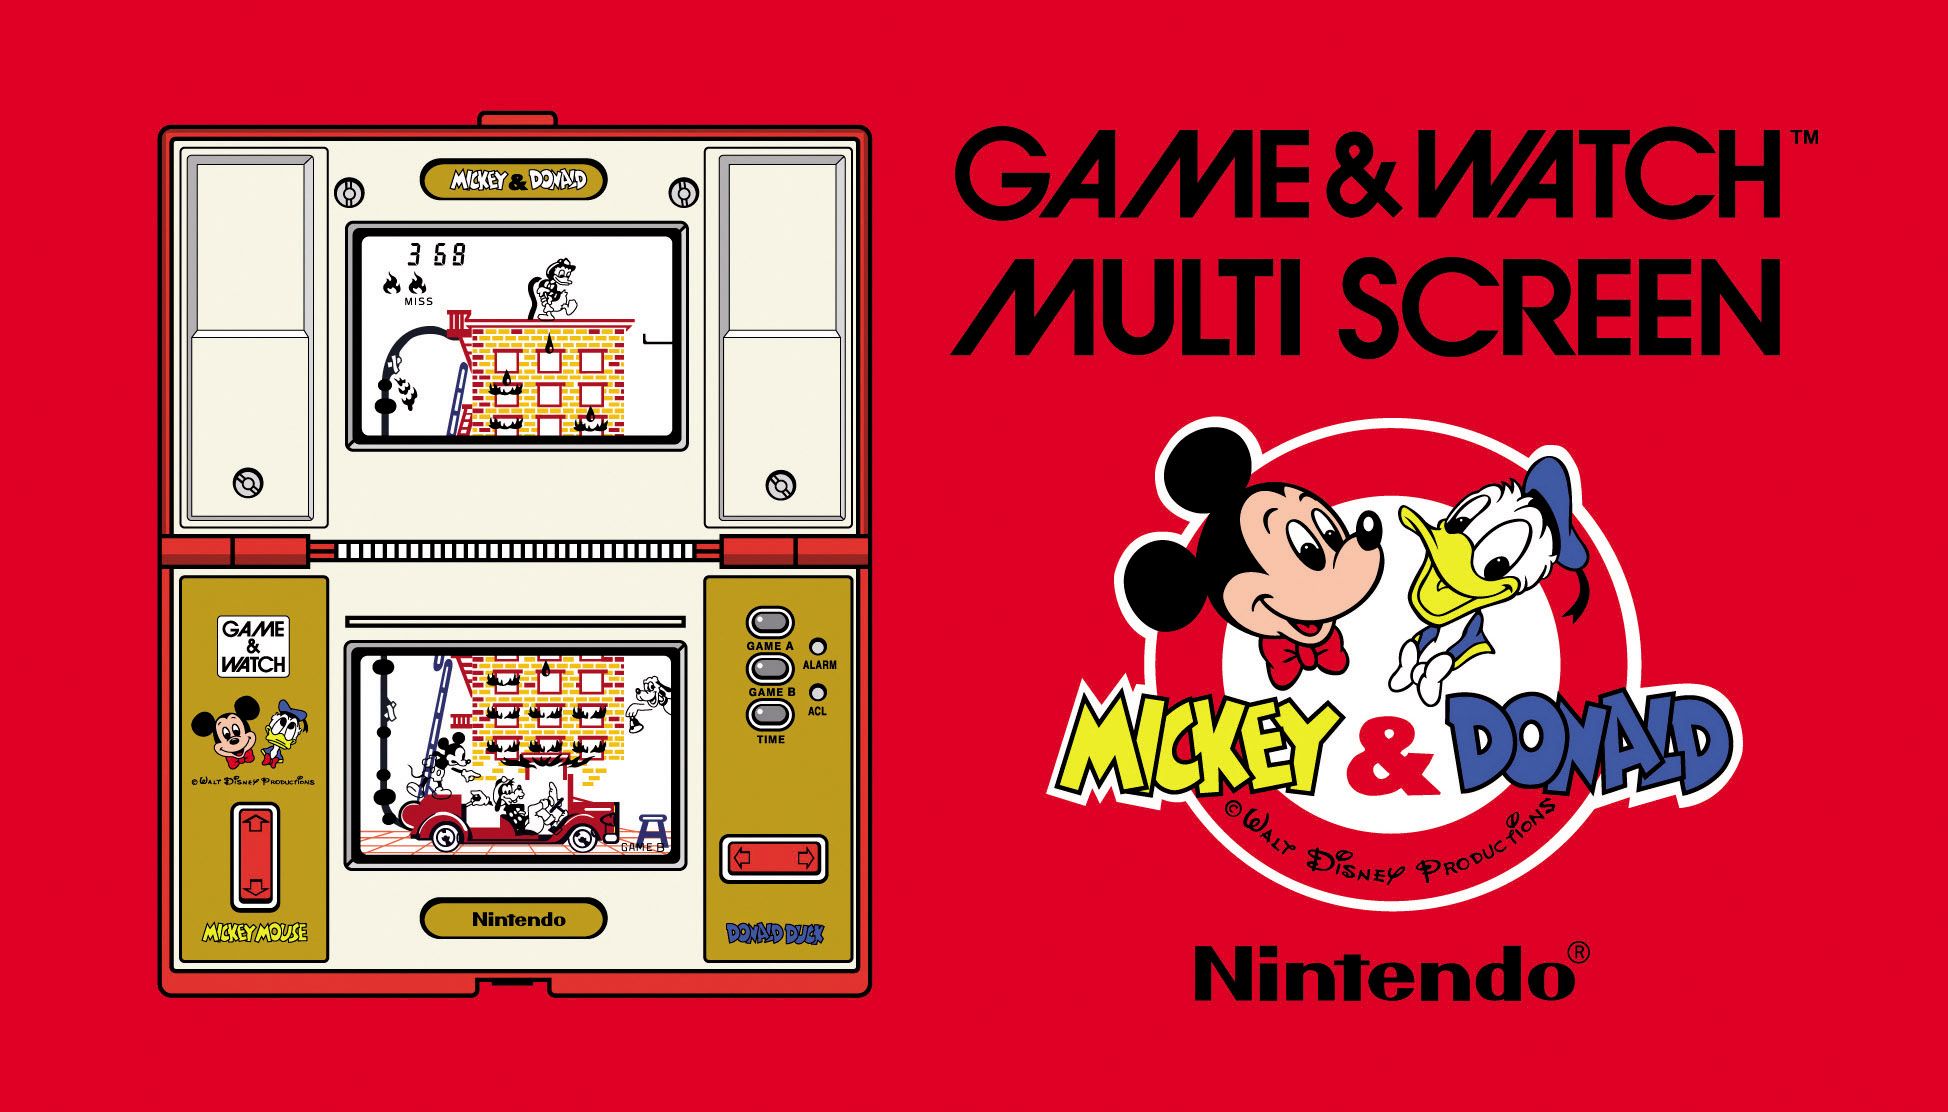 Game & Watch Mickey & Donald